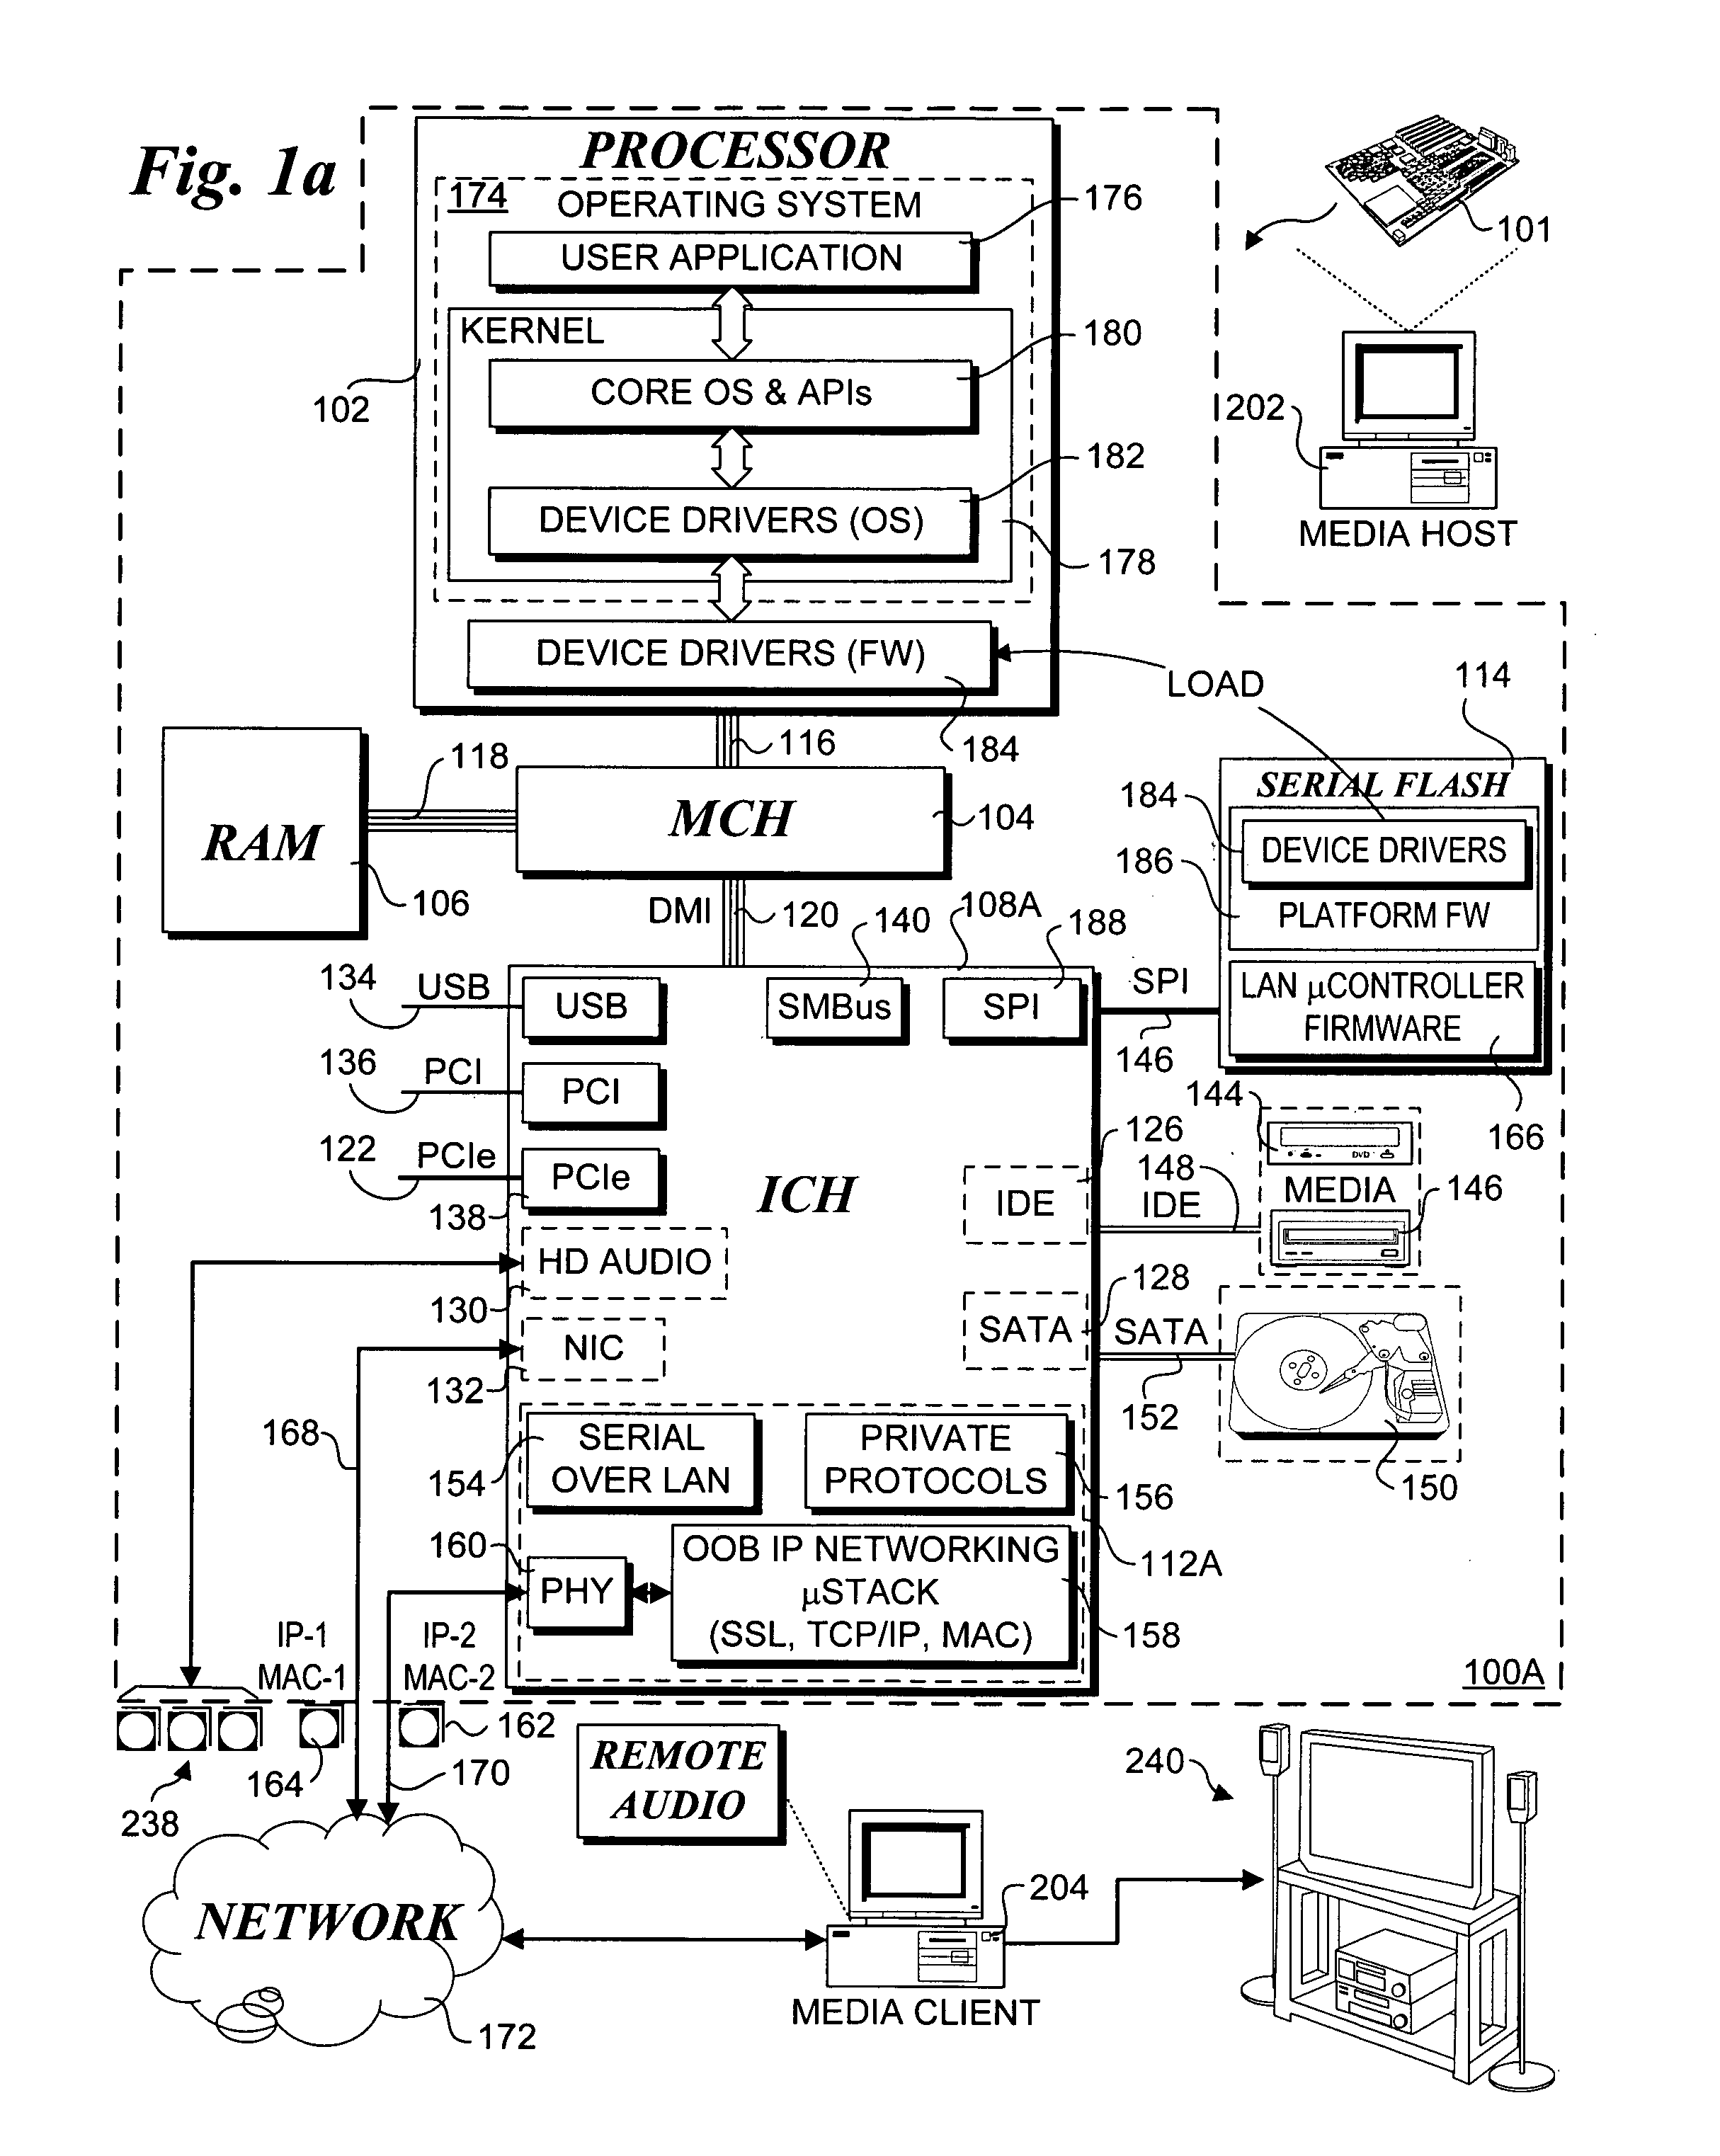 Method and apparatus for providing remote audio